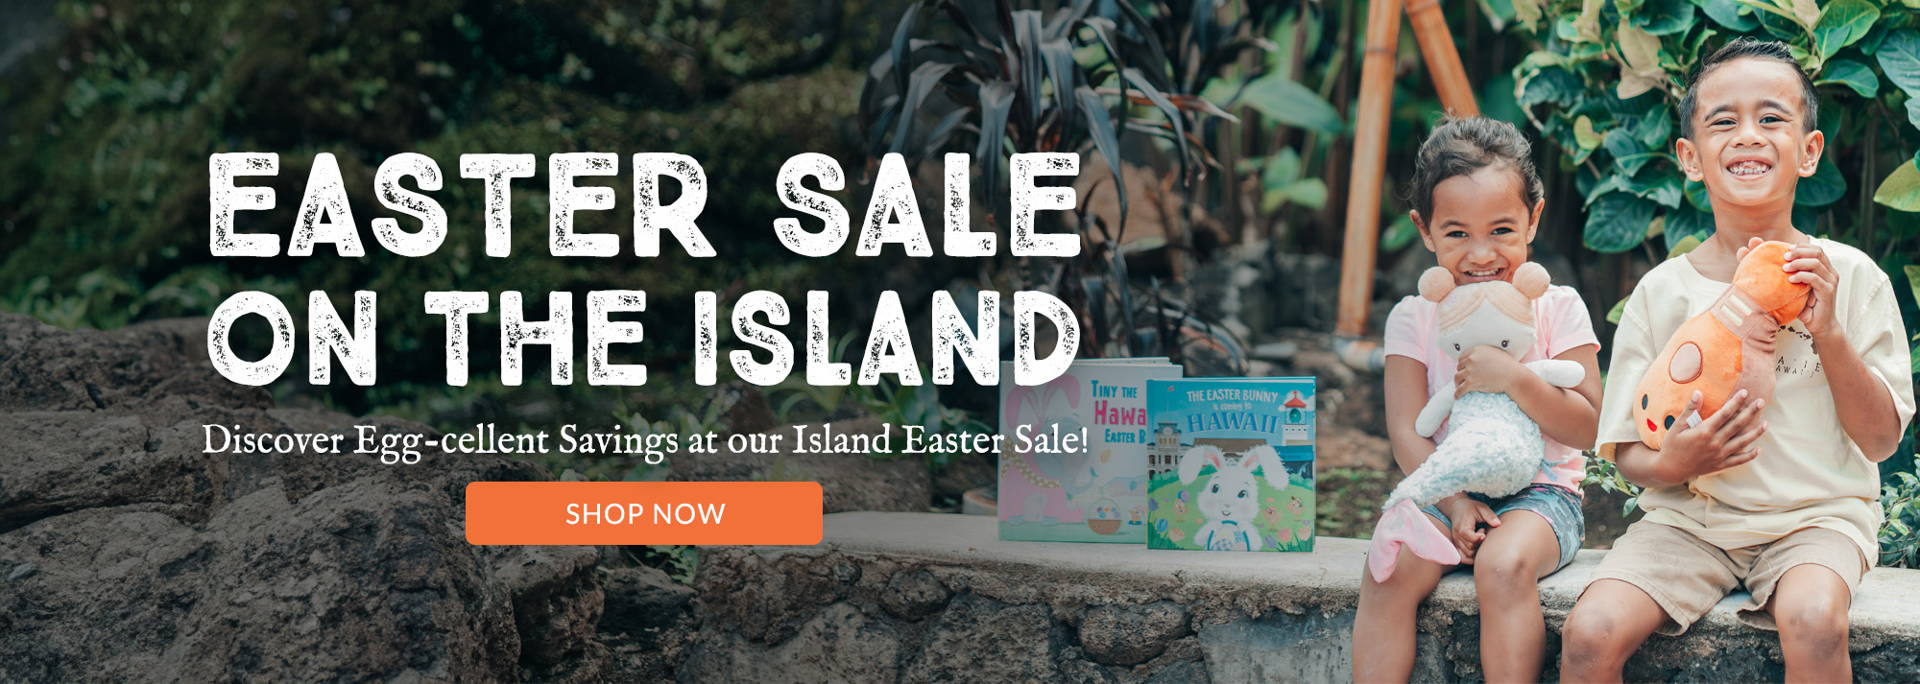 Easter Sale on the Island: Enjoy 15% Off Select Items and Discover Egg-citing Savings!